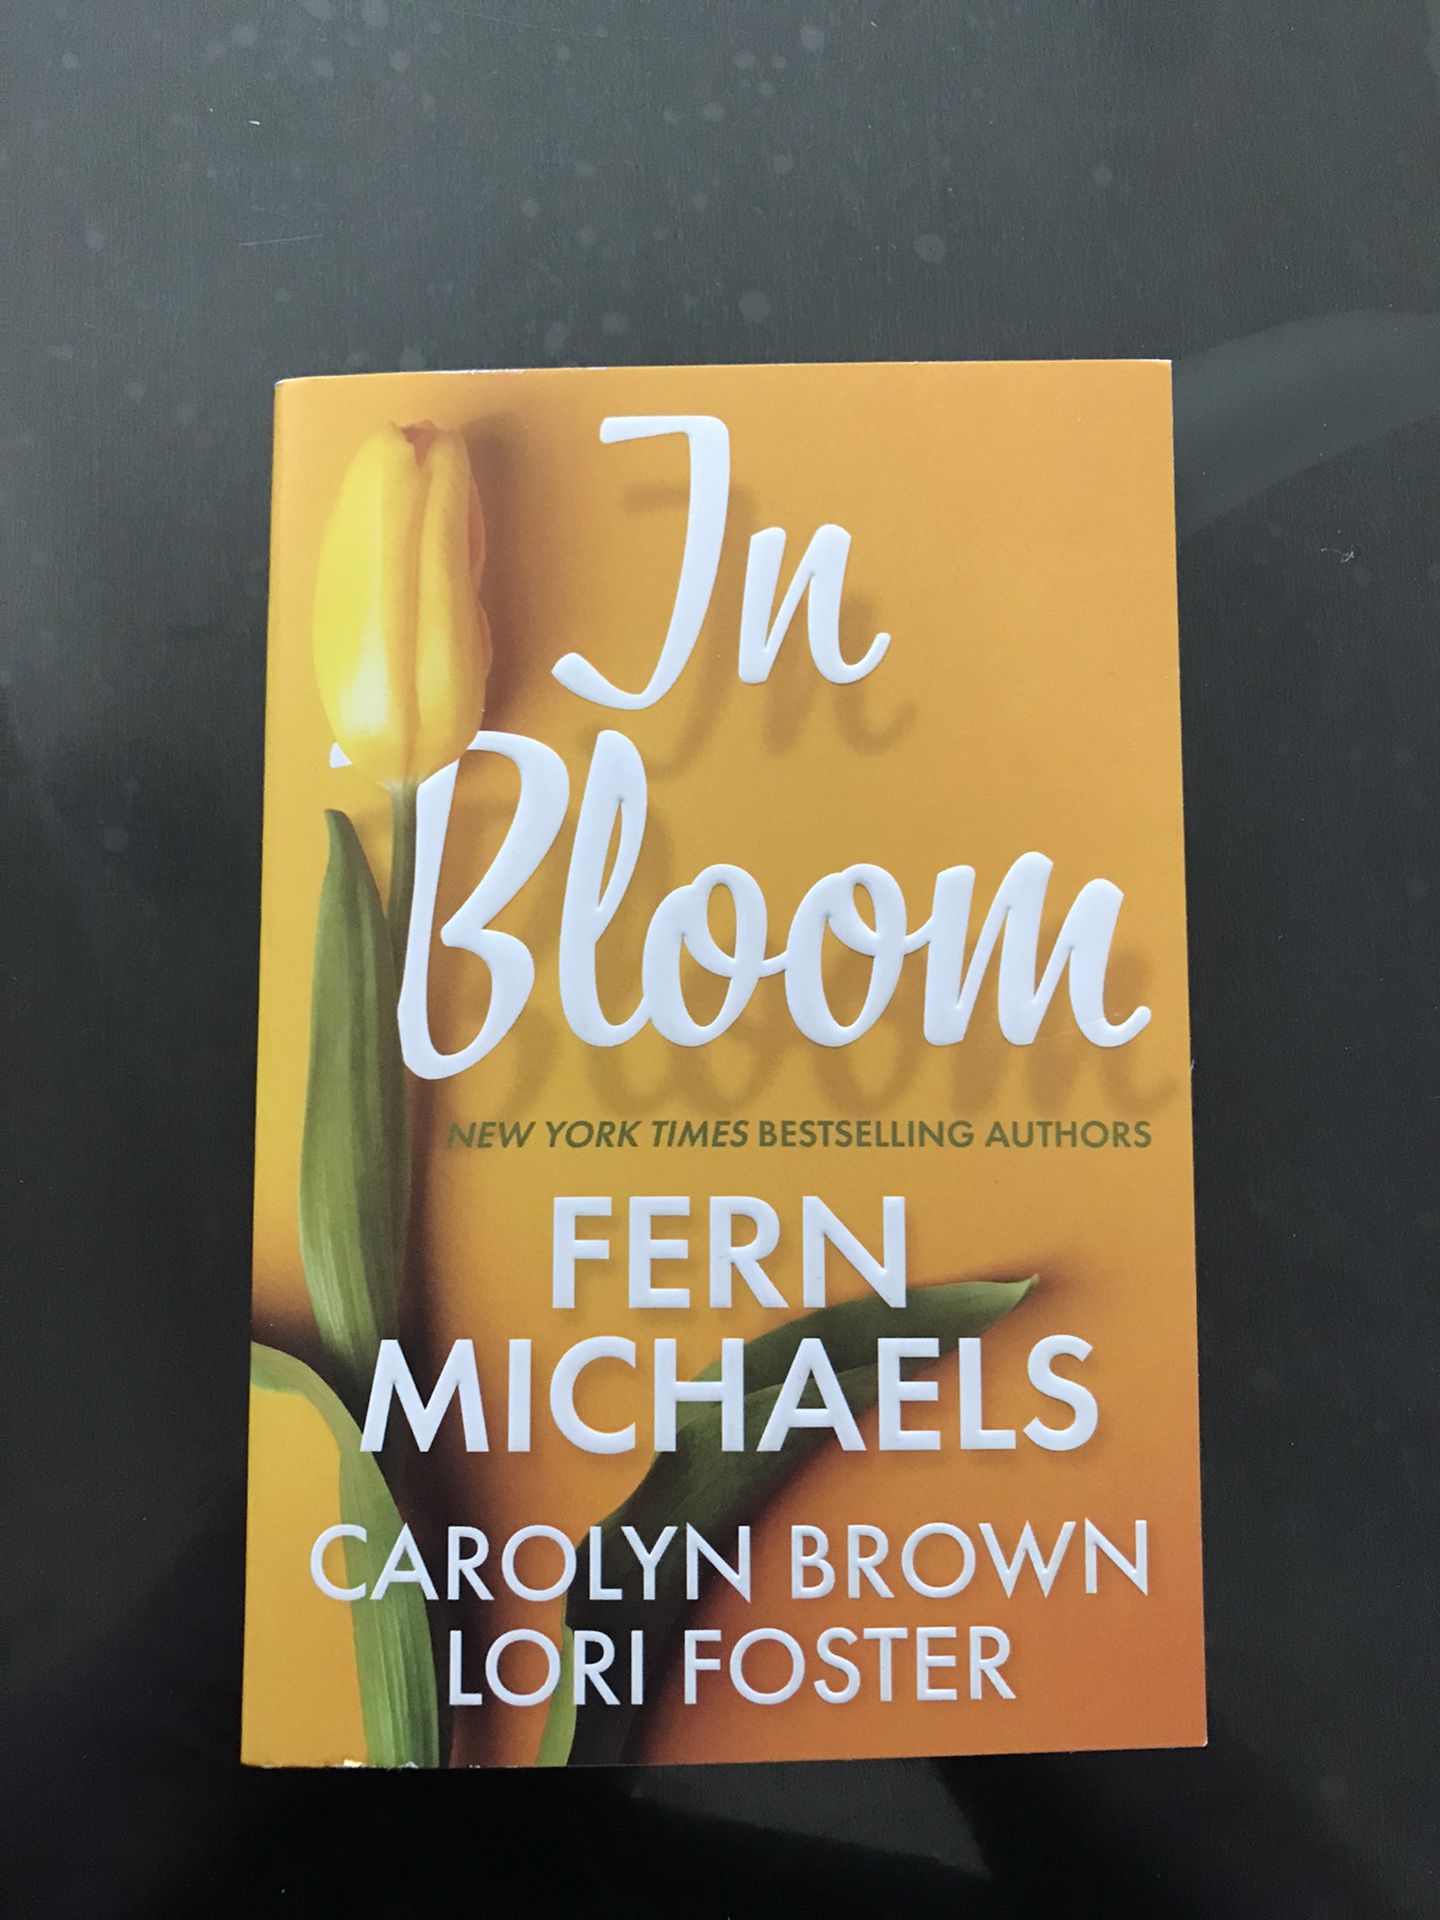 New Book In Bloom By Fern Michaels 